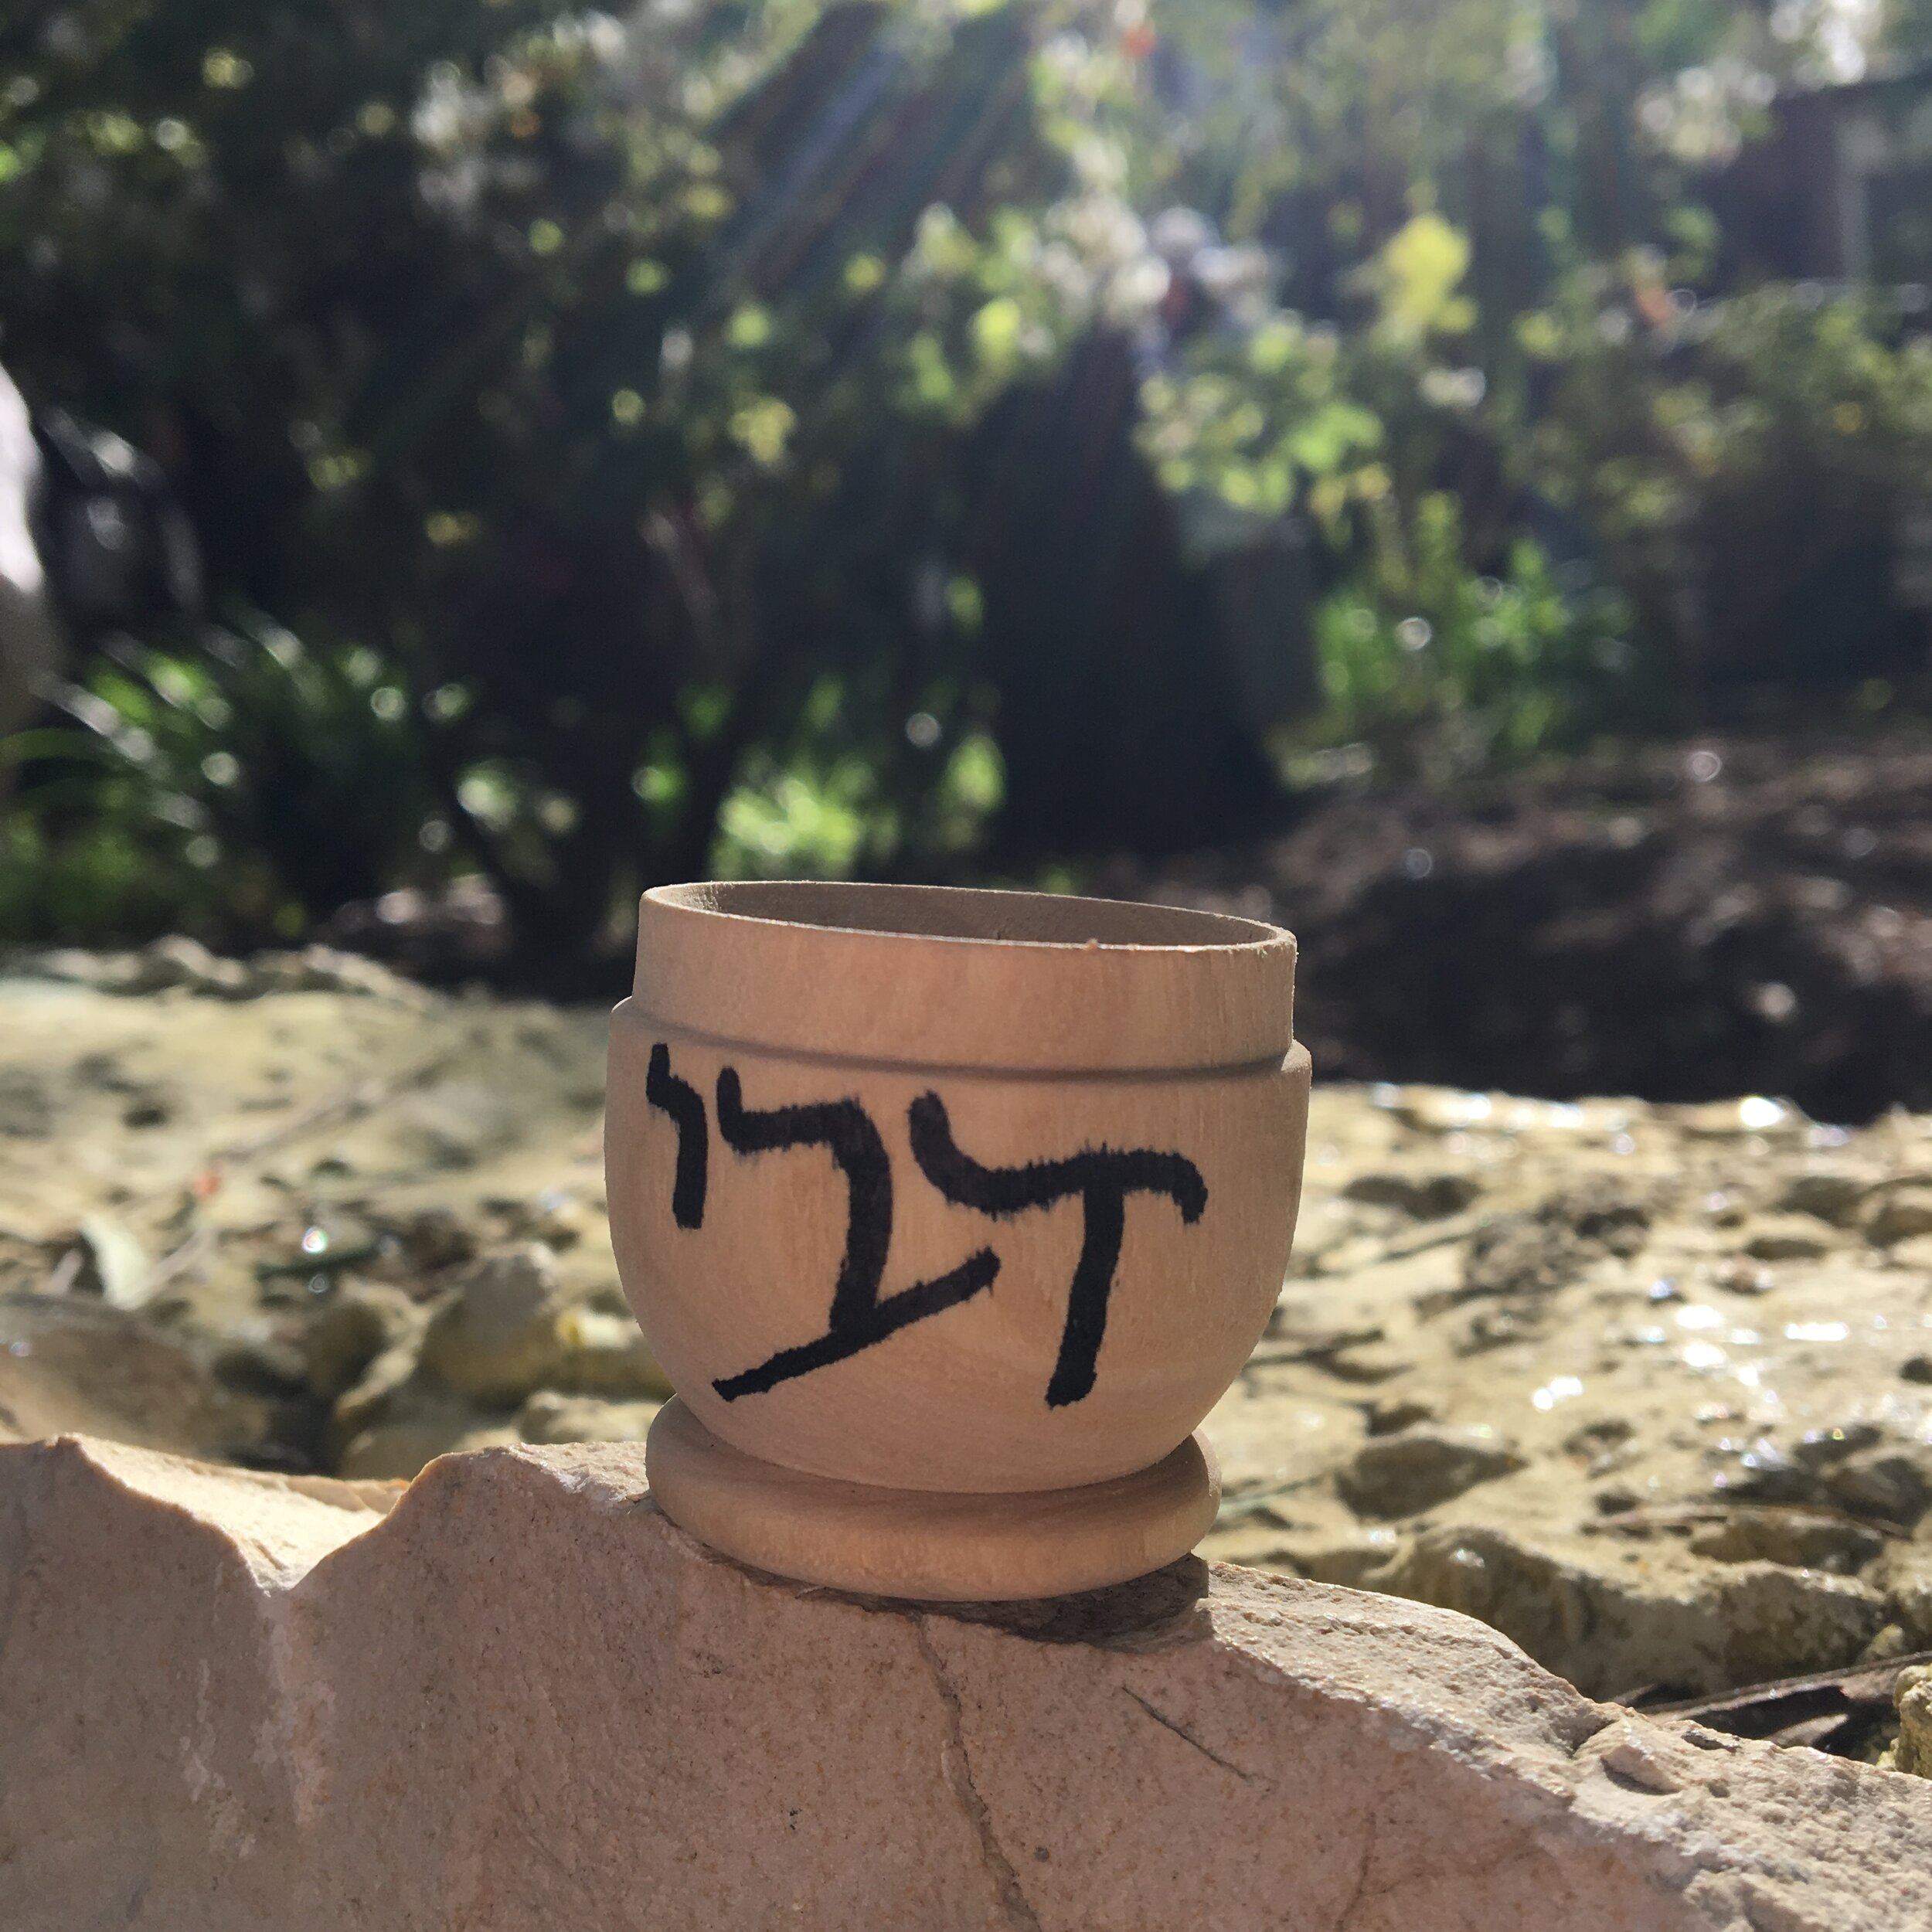  Our tour guide gave each of us a communion cup and wrote our names in Hebrew on them. 